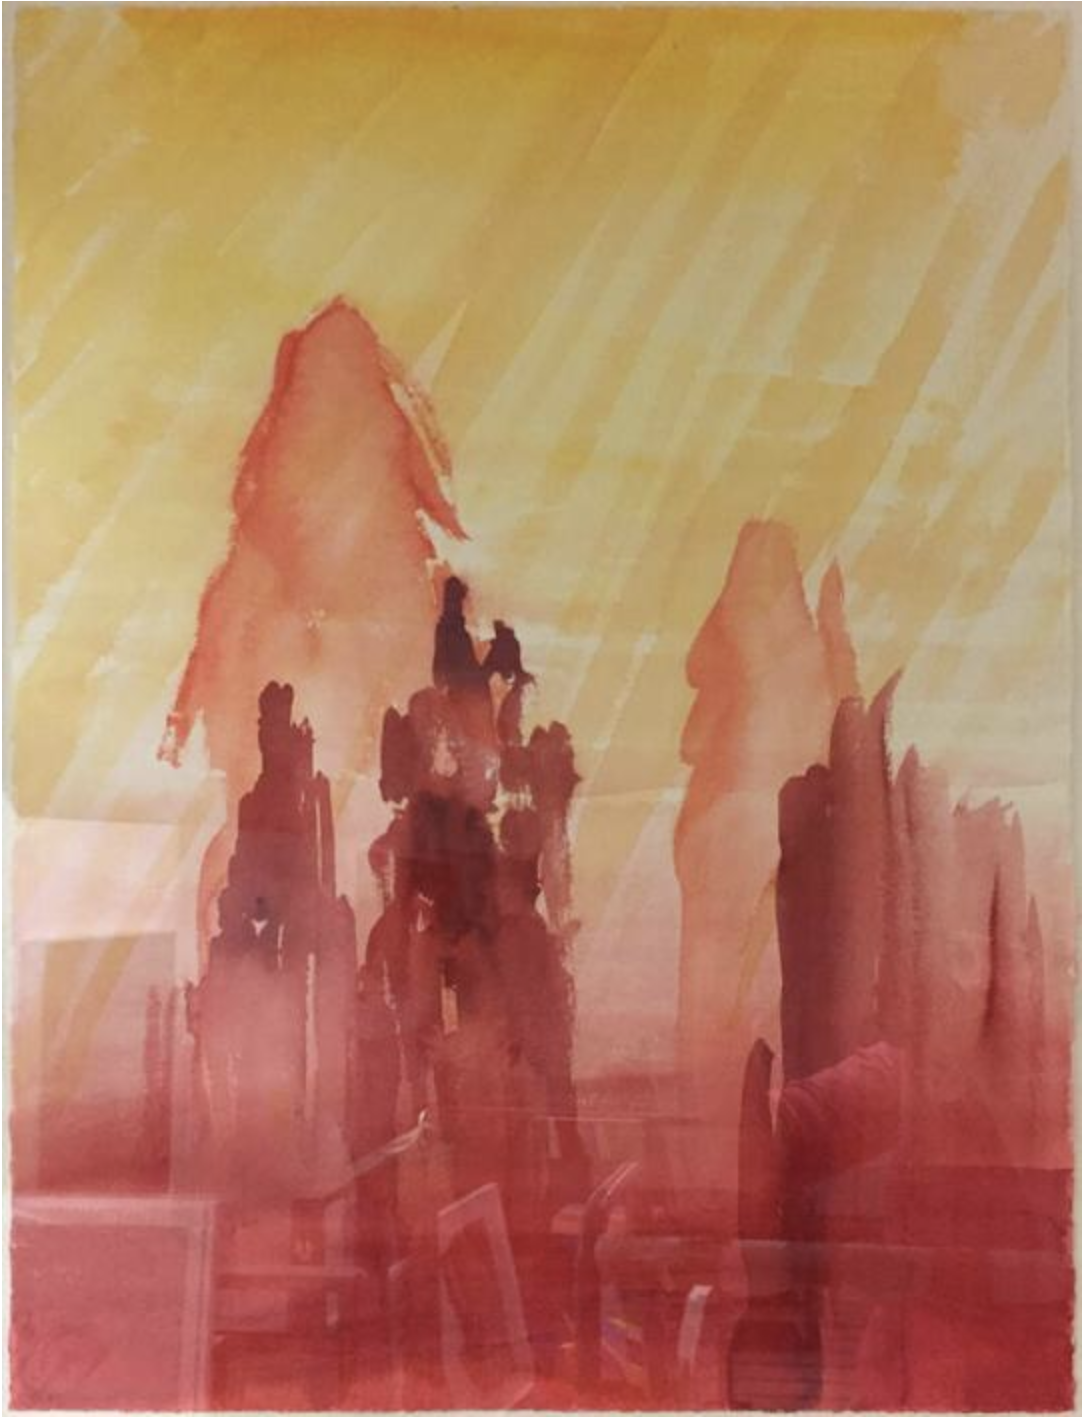   Sunlight , 1989. Watercolor on paper. 29.75 × 22.25 in. Collection  Museum of Fine Arts, Houston  